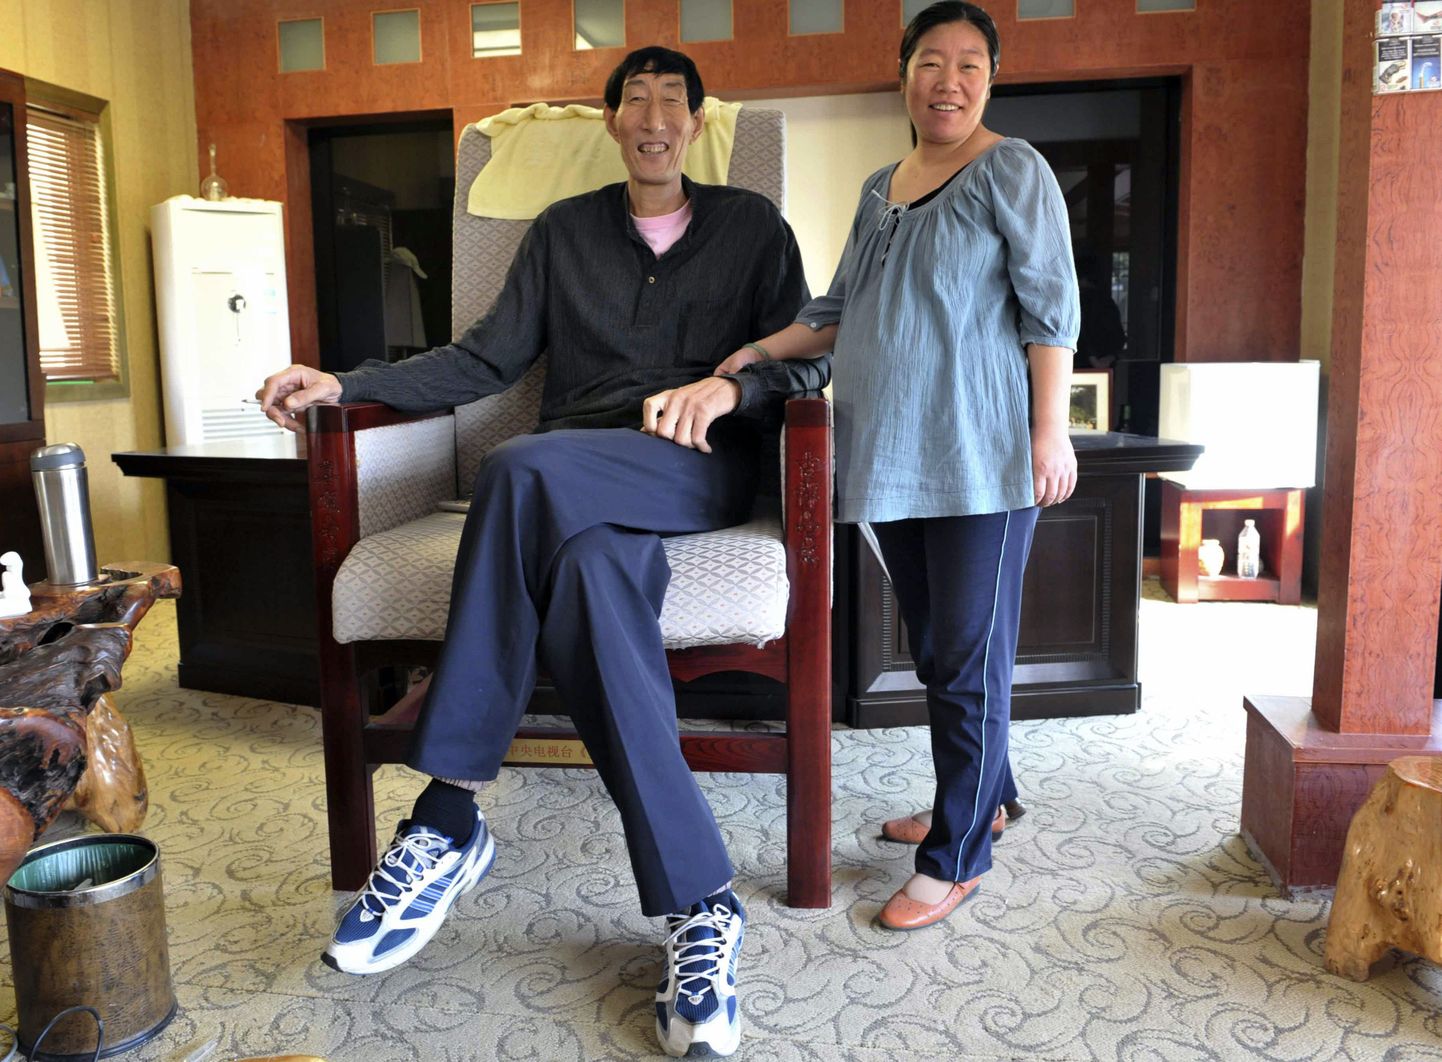 Bao Xishun (L), 57, a 2.36-metre (7 feet, 9 inches) herdsman listed by the Guinness World Records as the tallest living man, poses for photograph with his pregnant wife Xia Shujuan, 29, 1.68-metre (5 feet, 5 inches), at their apartment in Zunhua, Hebei province September 25, 2008. Guinness World Records has returned the title of world's tallest man to China's Bao after Ukrainian Leonid Stadnyk refused to be measured under new guidelines. Picture taken September 25, 2008. REUTERS/Stringer (CHINA).  CHINA OUT. NO COMMERCIAL OR EDITORIAL SALES IN CHINA.